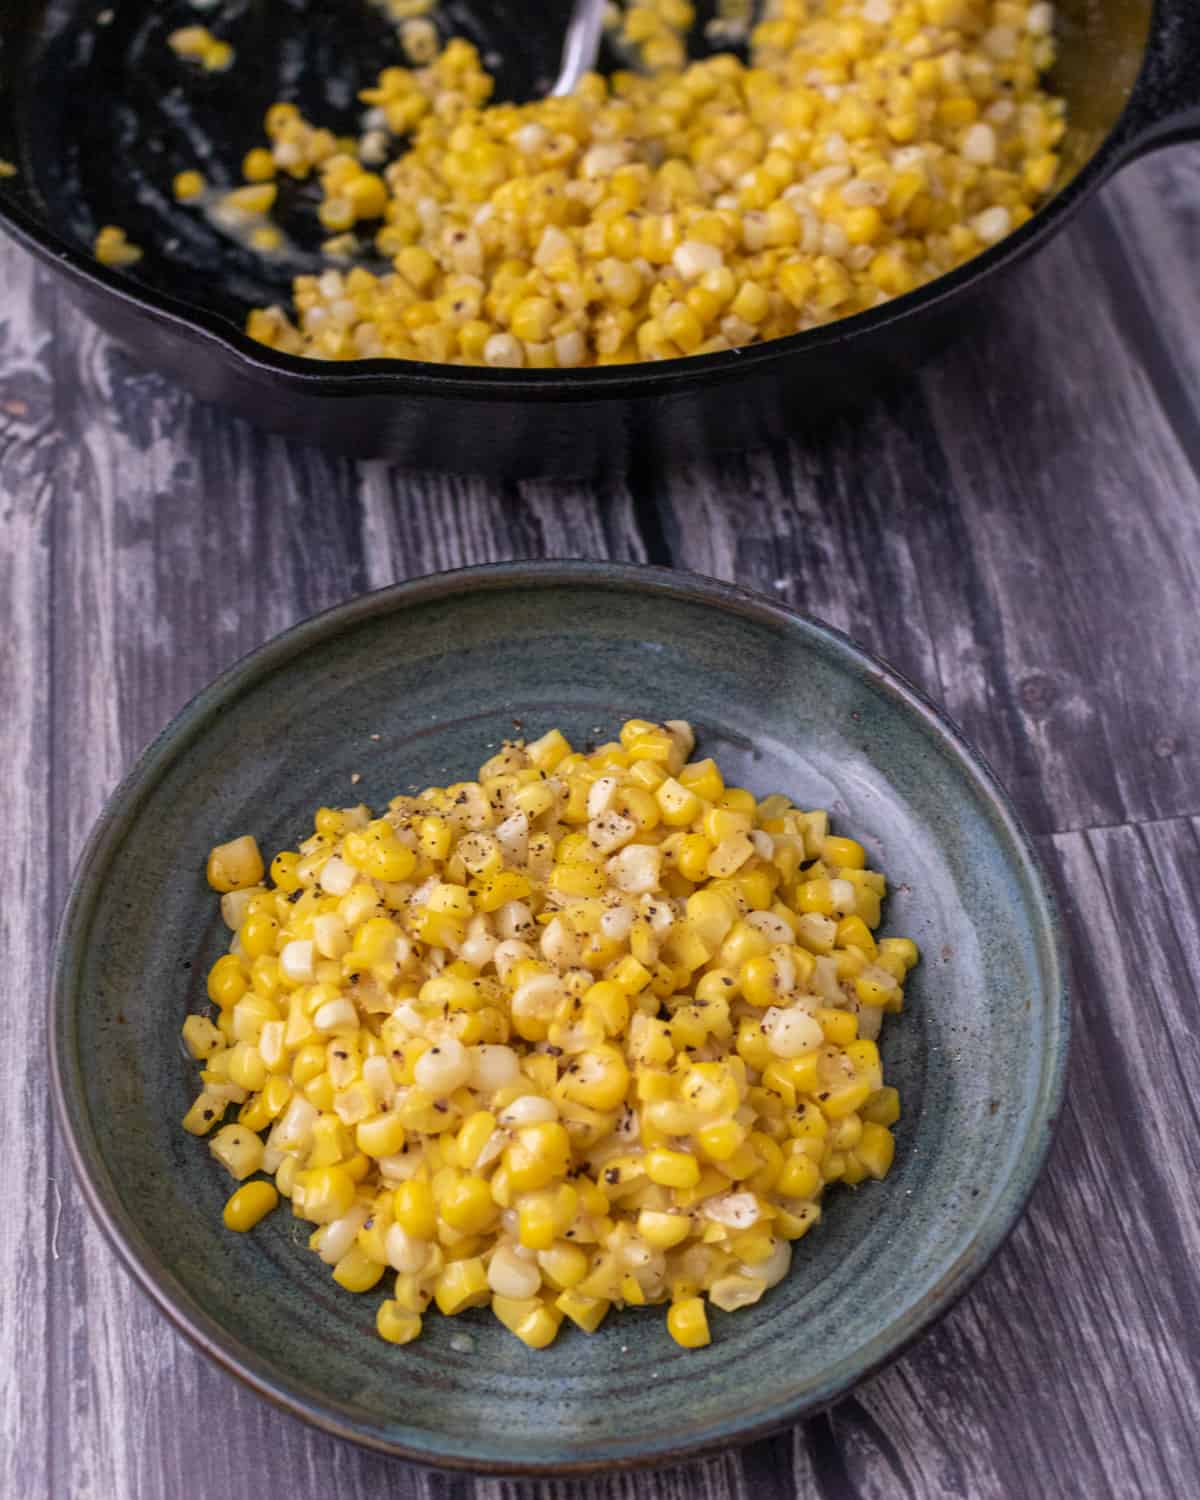 Miso butter corn on a small green plate in front of the cast iron skillet